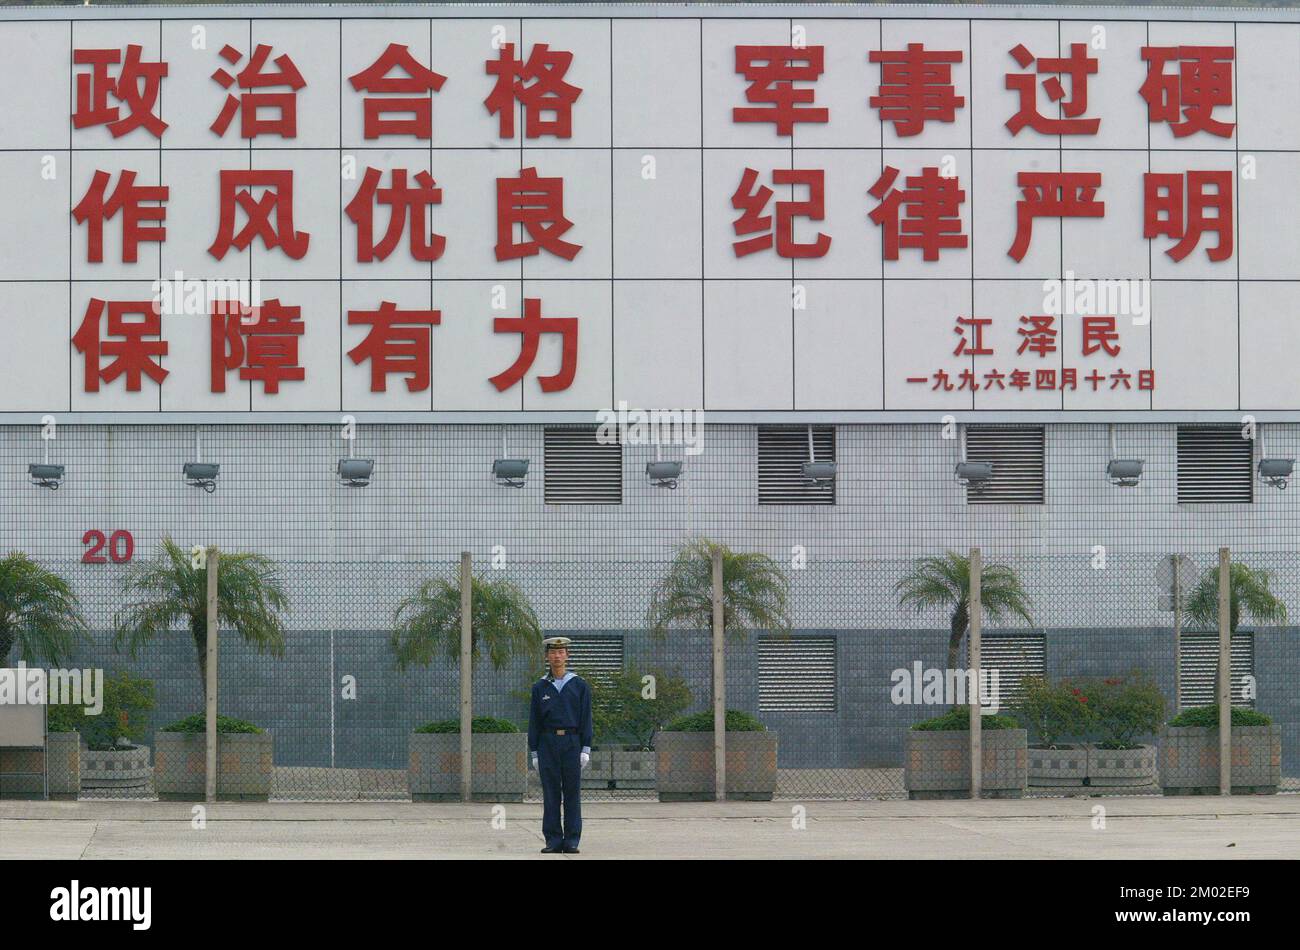 Pictured shows inscription by Jiang Zemin at the People's Liberation Army (PLA) naval base on Stonecutter island. 28 February 2004 Stock Photo